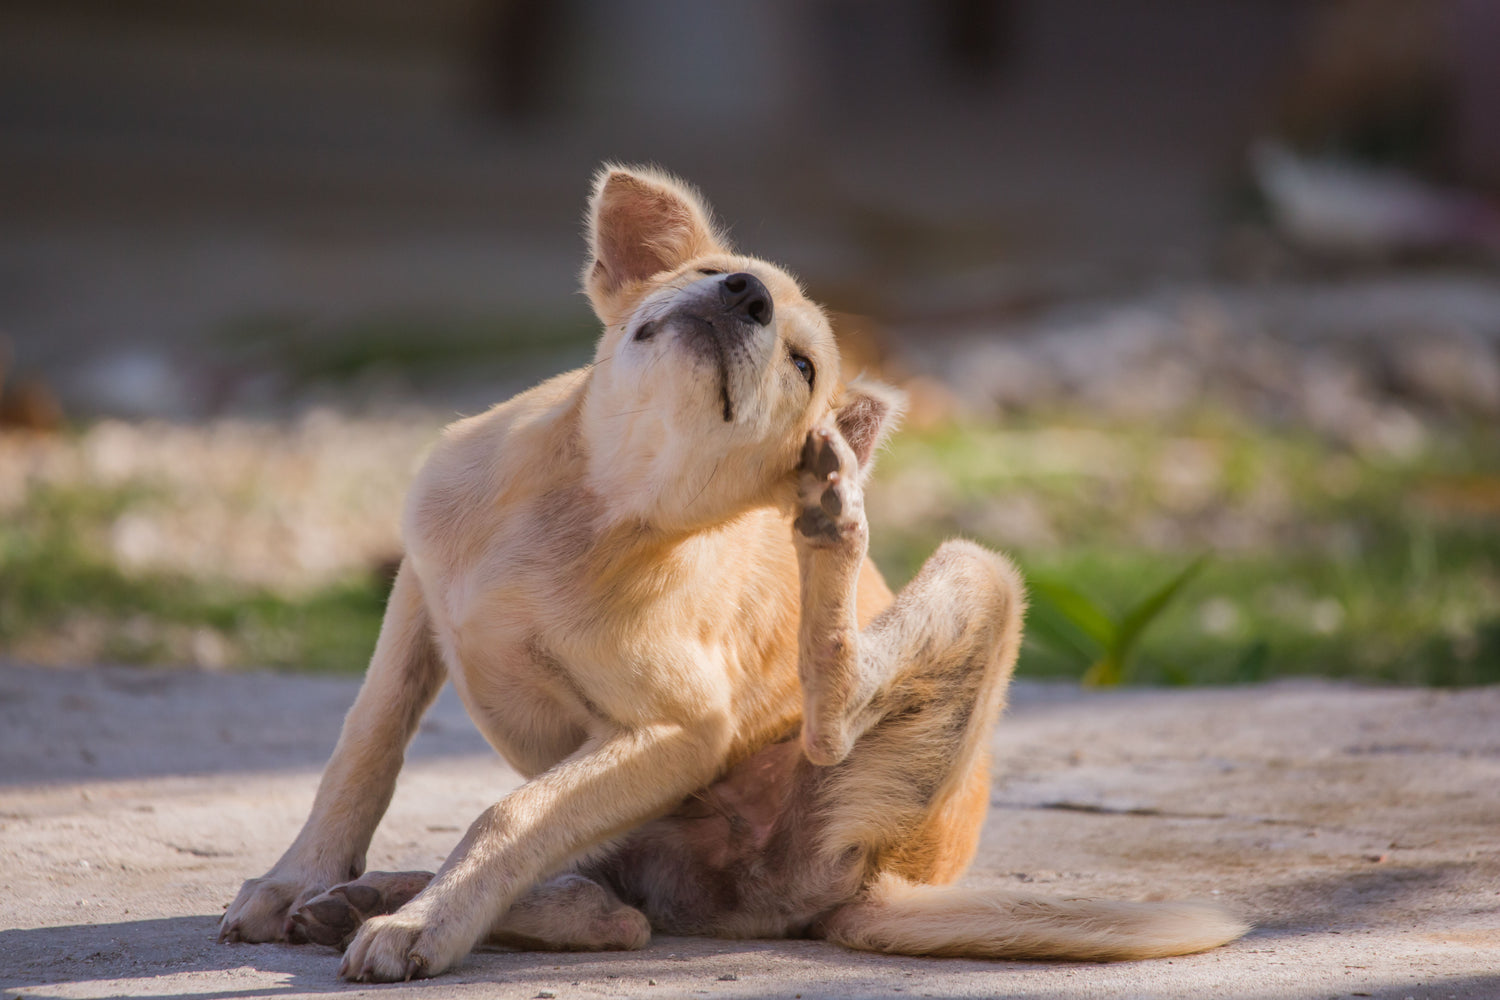 Dog Itching: How To Make It Stop